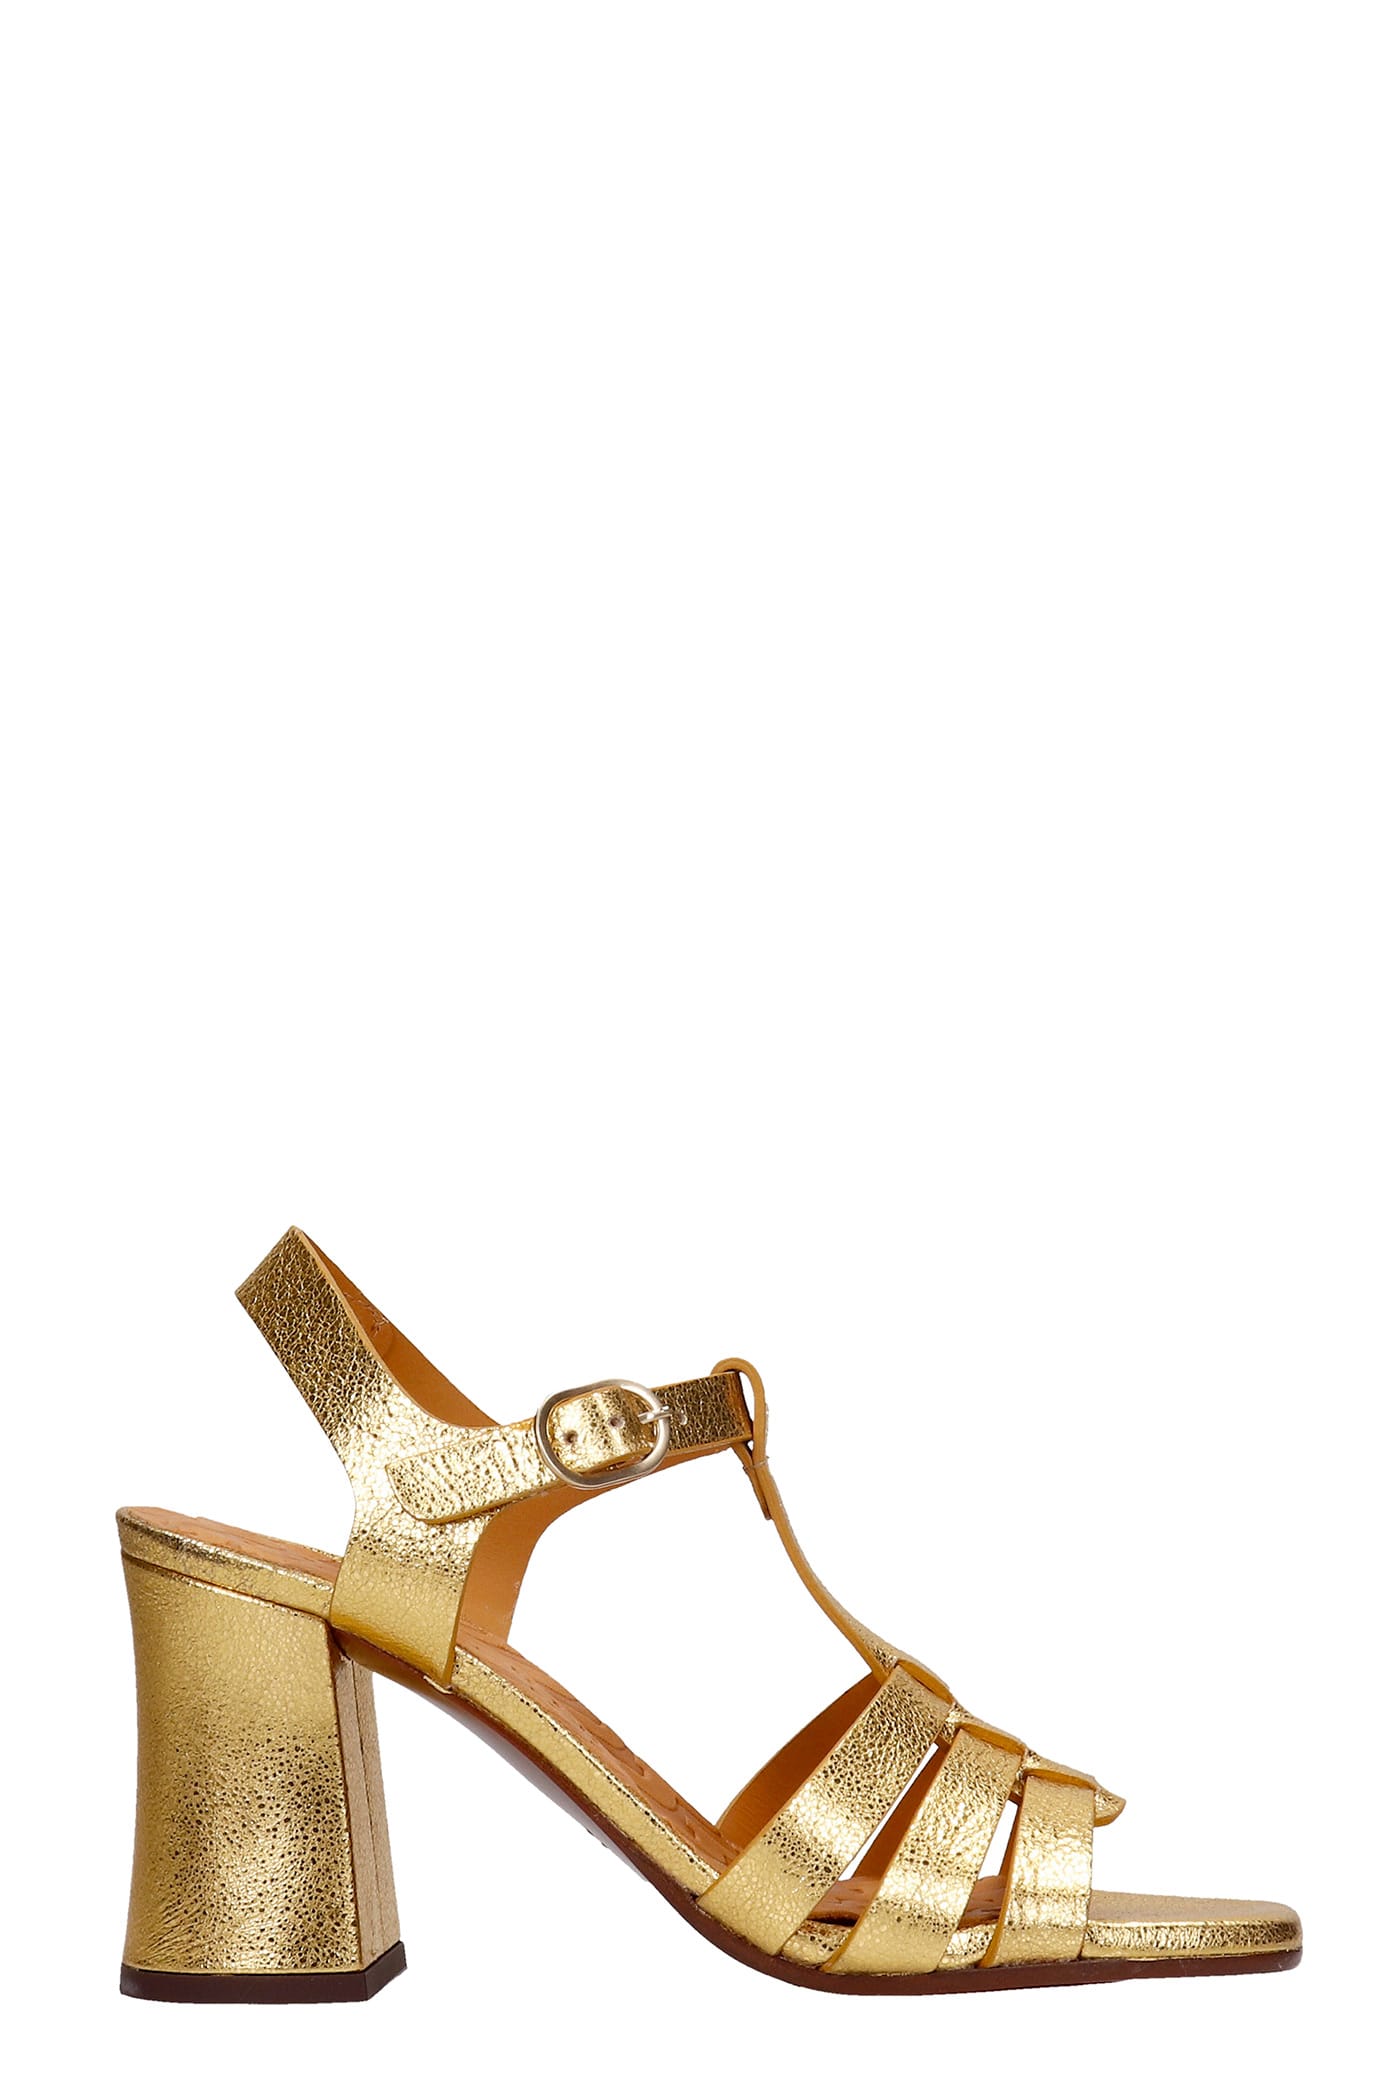 Chie Mihara Paxi Sandals In Gold Leather